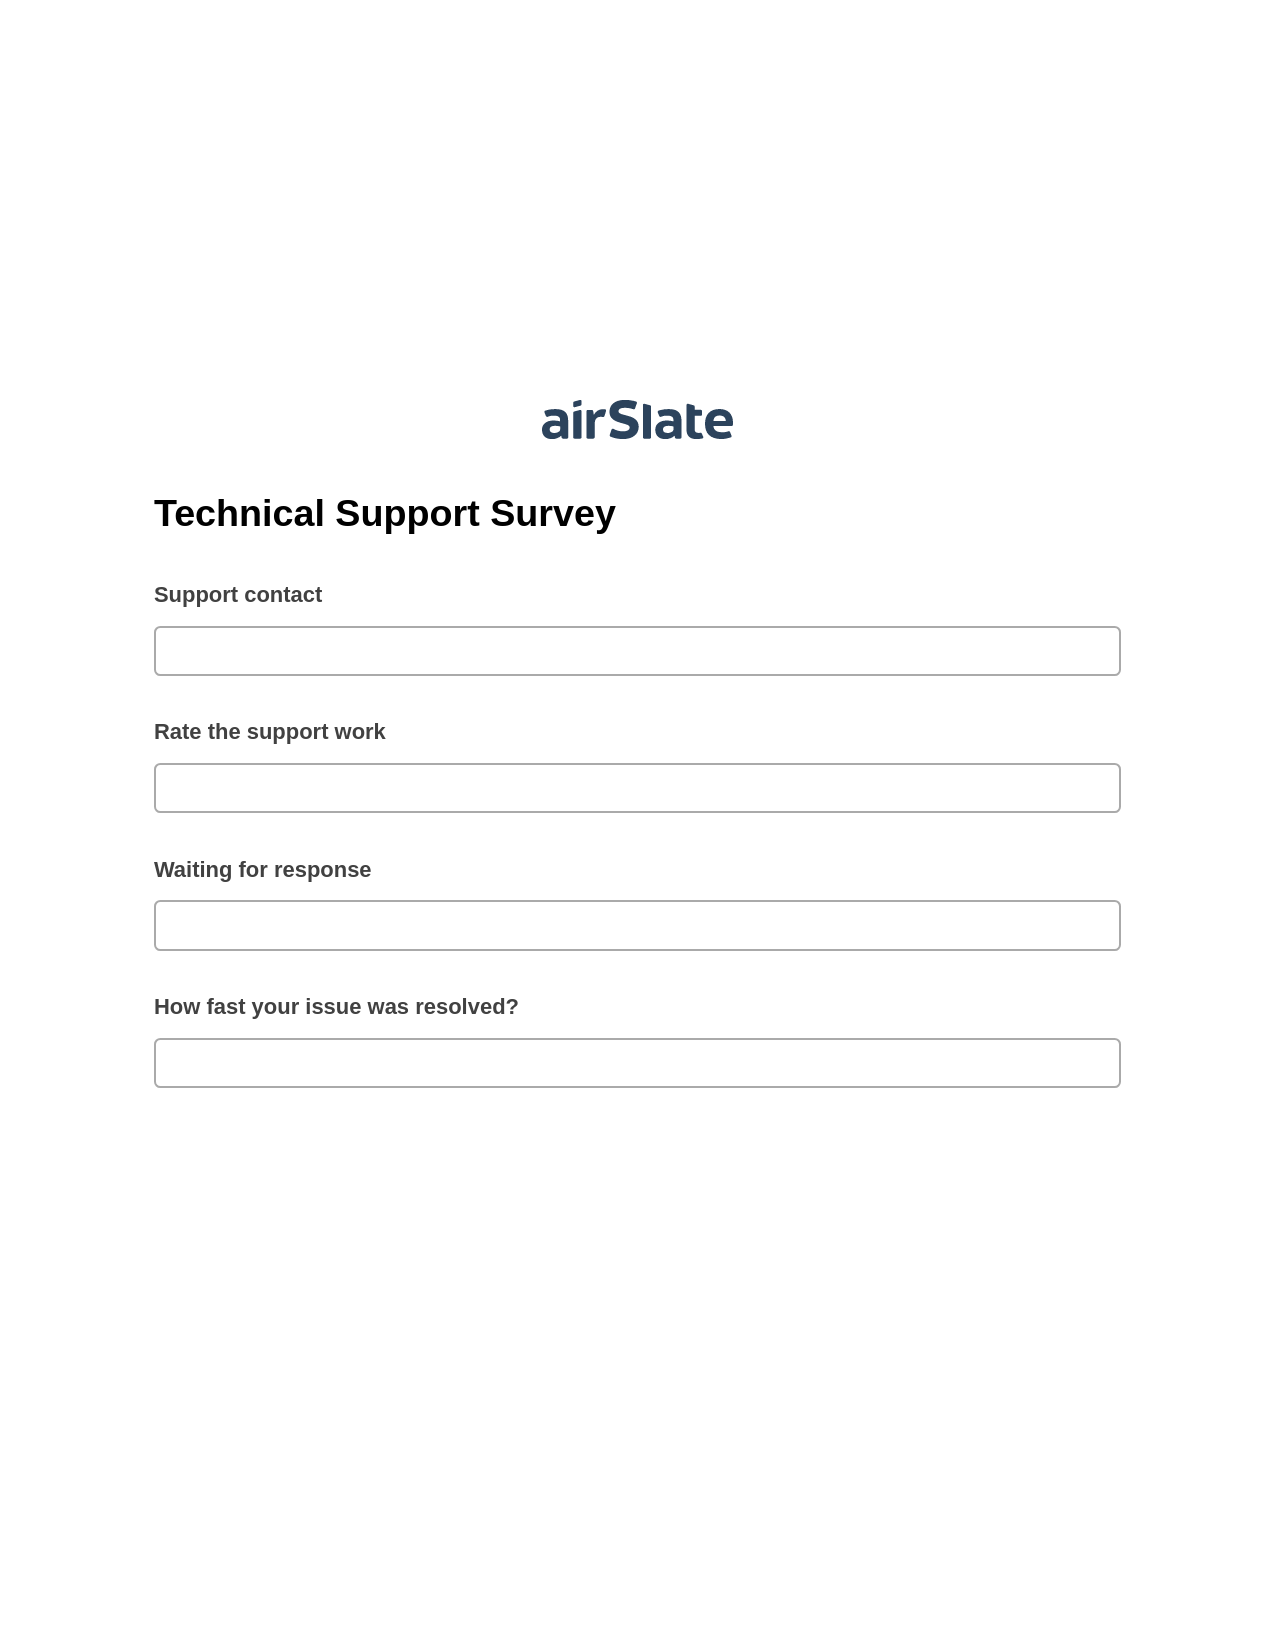 Technical Support Survey Pre-fill from Salesforce Records with SOQL Bot, Send a Slate with Roles Bot, Archive to SharePoint Folder Bot